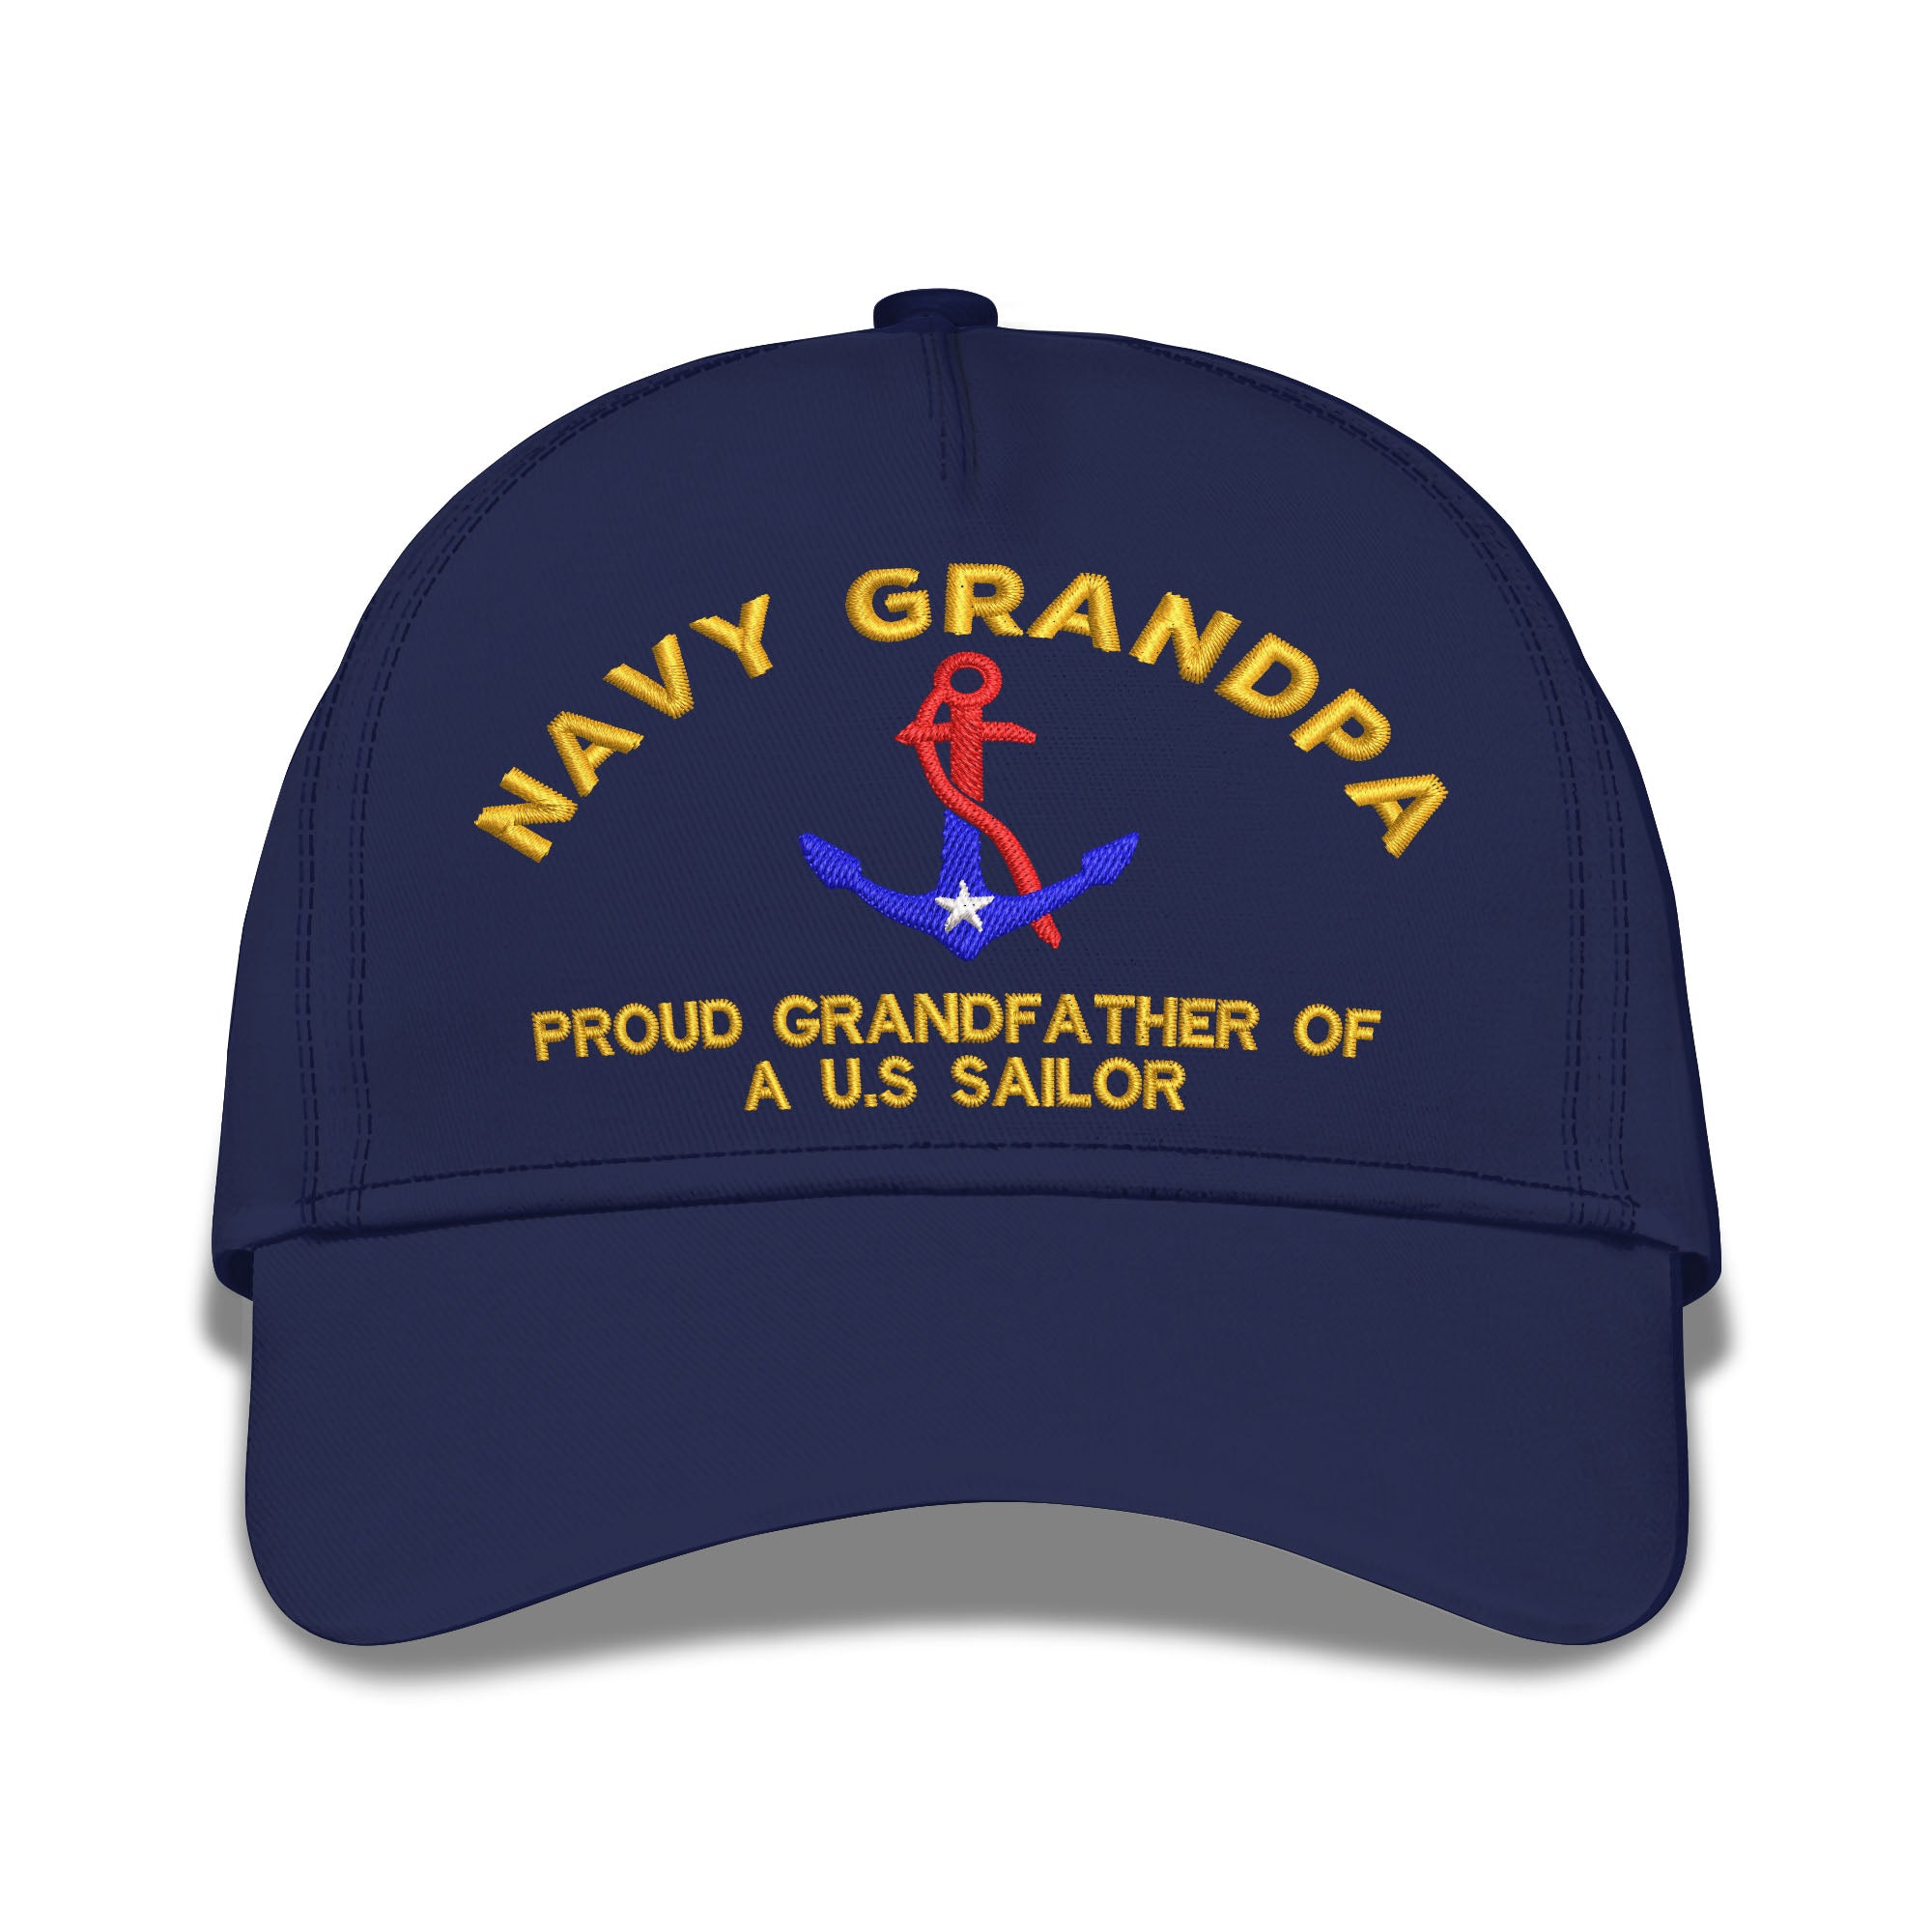 Navy Grandpa Proud Grandfaather Ther Of A U.S Sailor Embroidered Baseball Caps